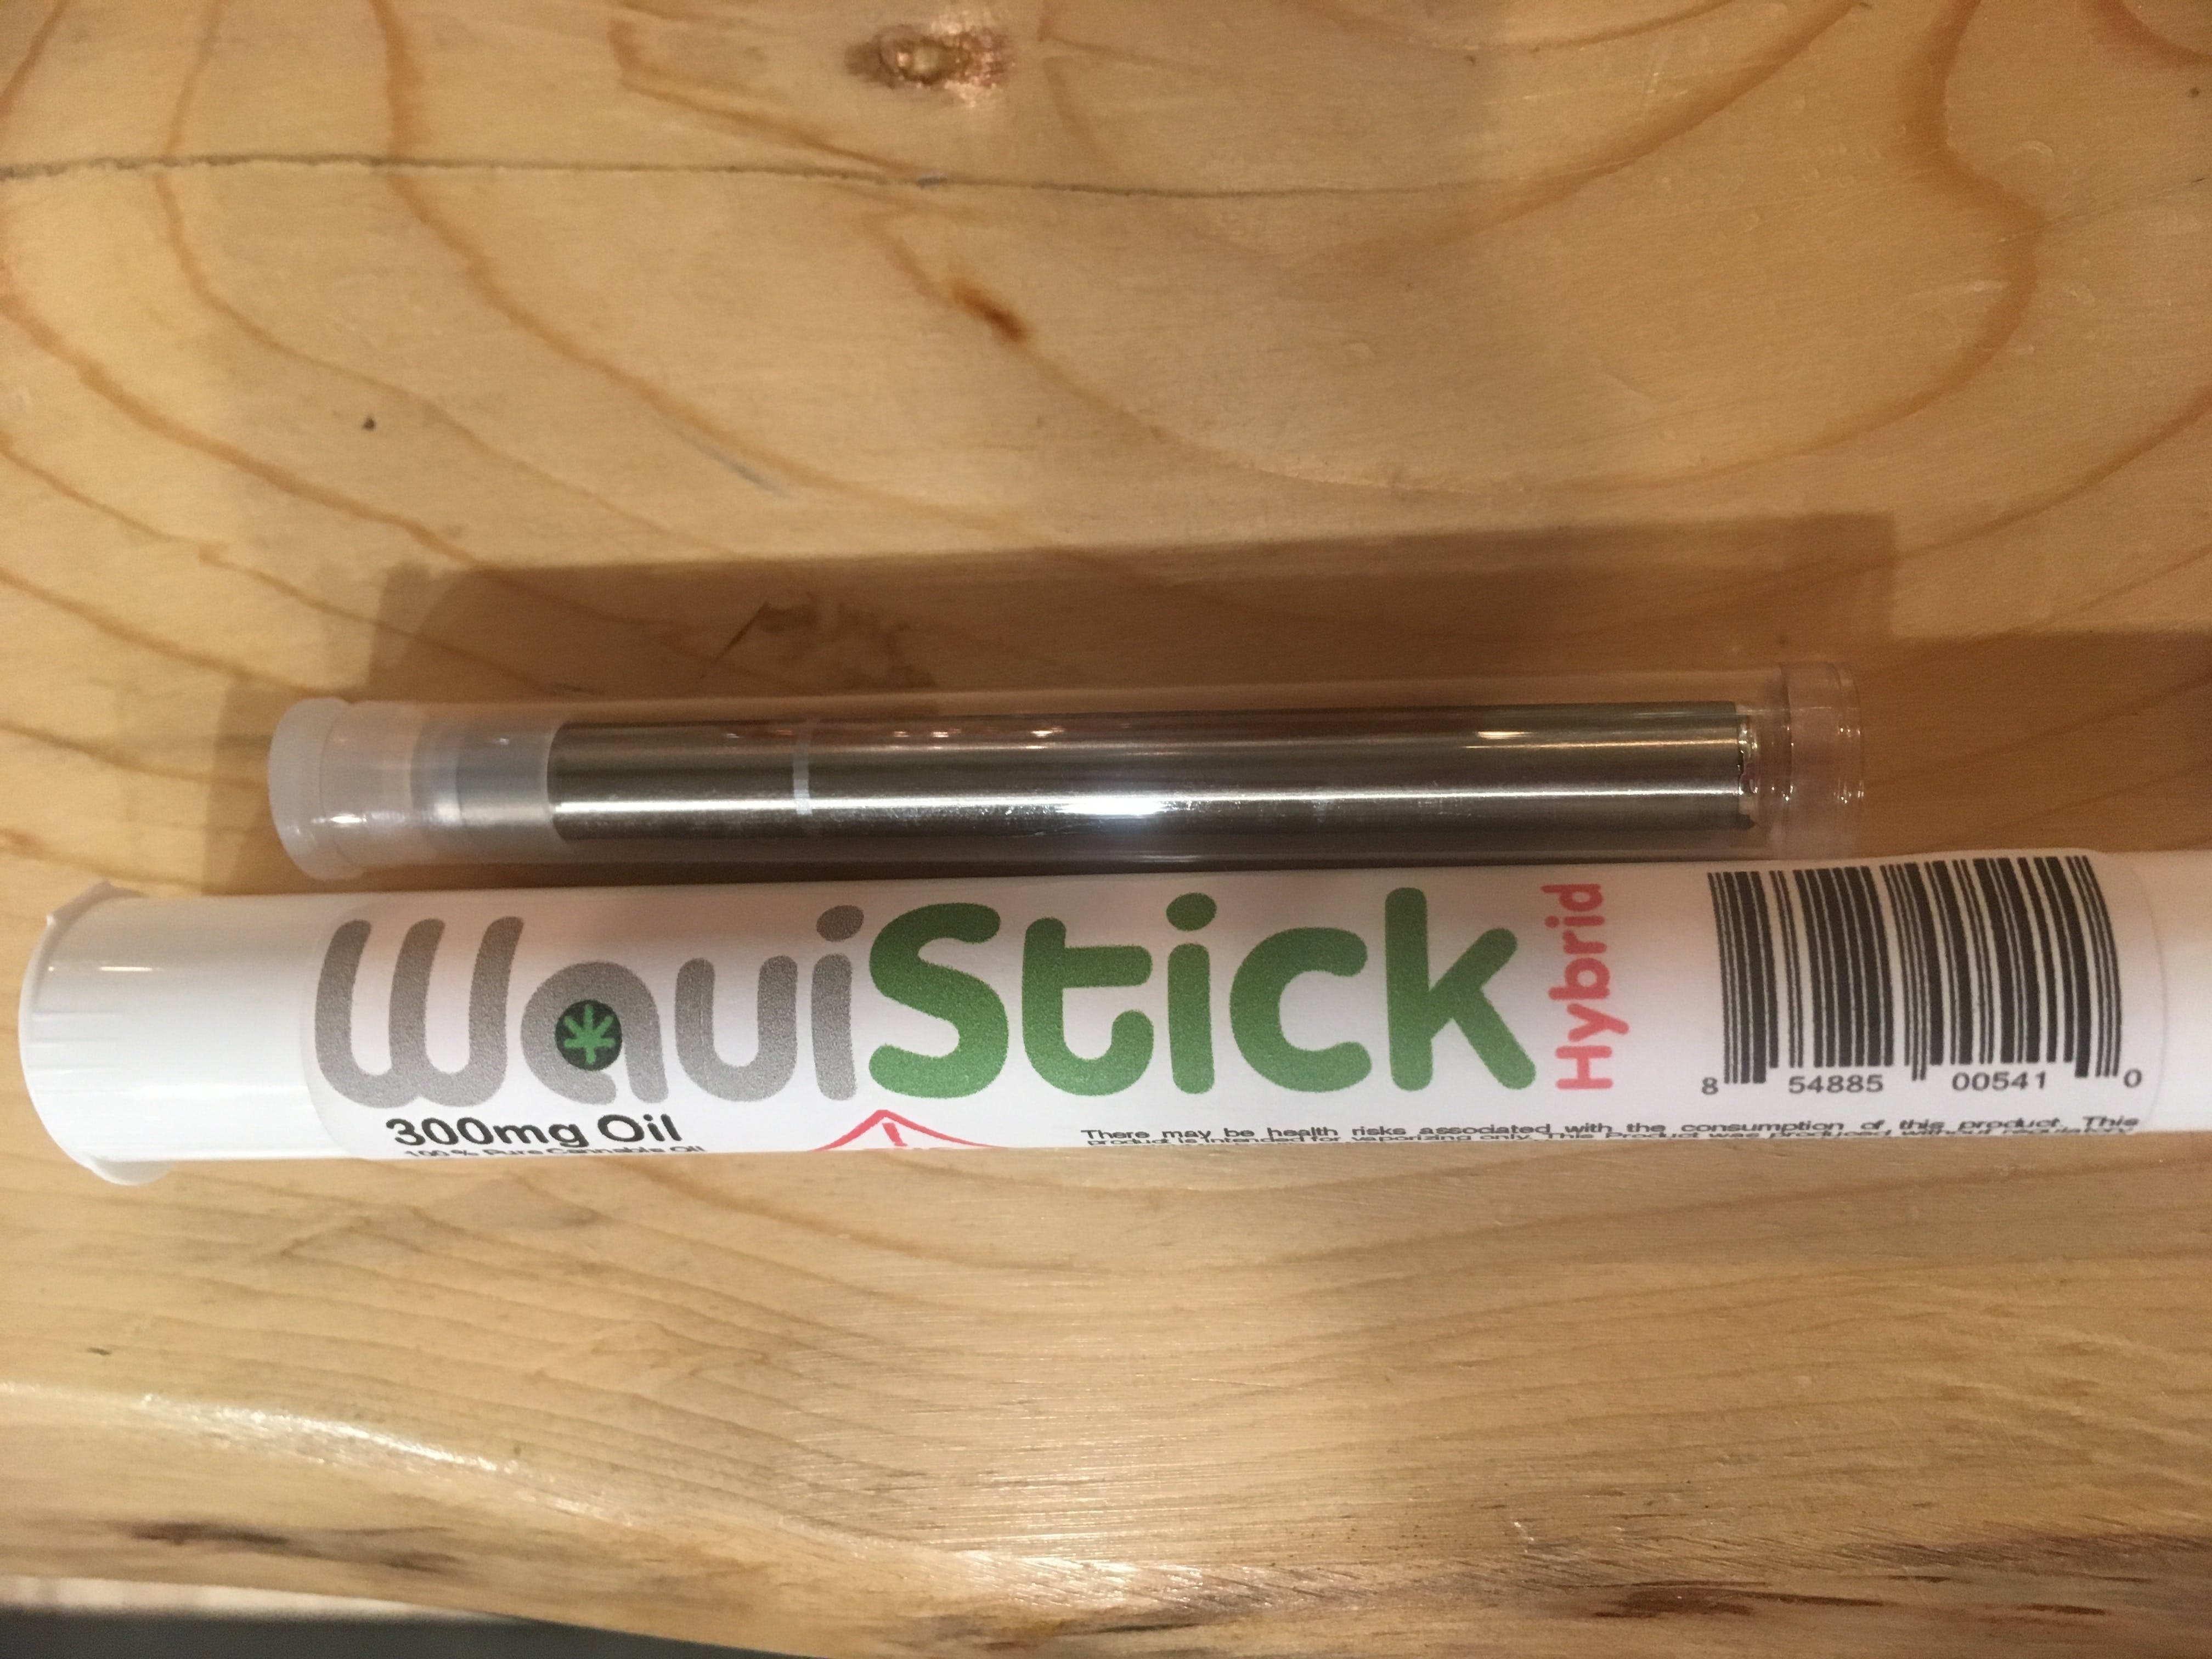 concentrate-waui-stick-hybrid